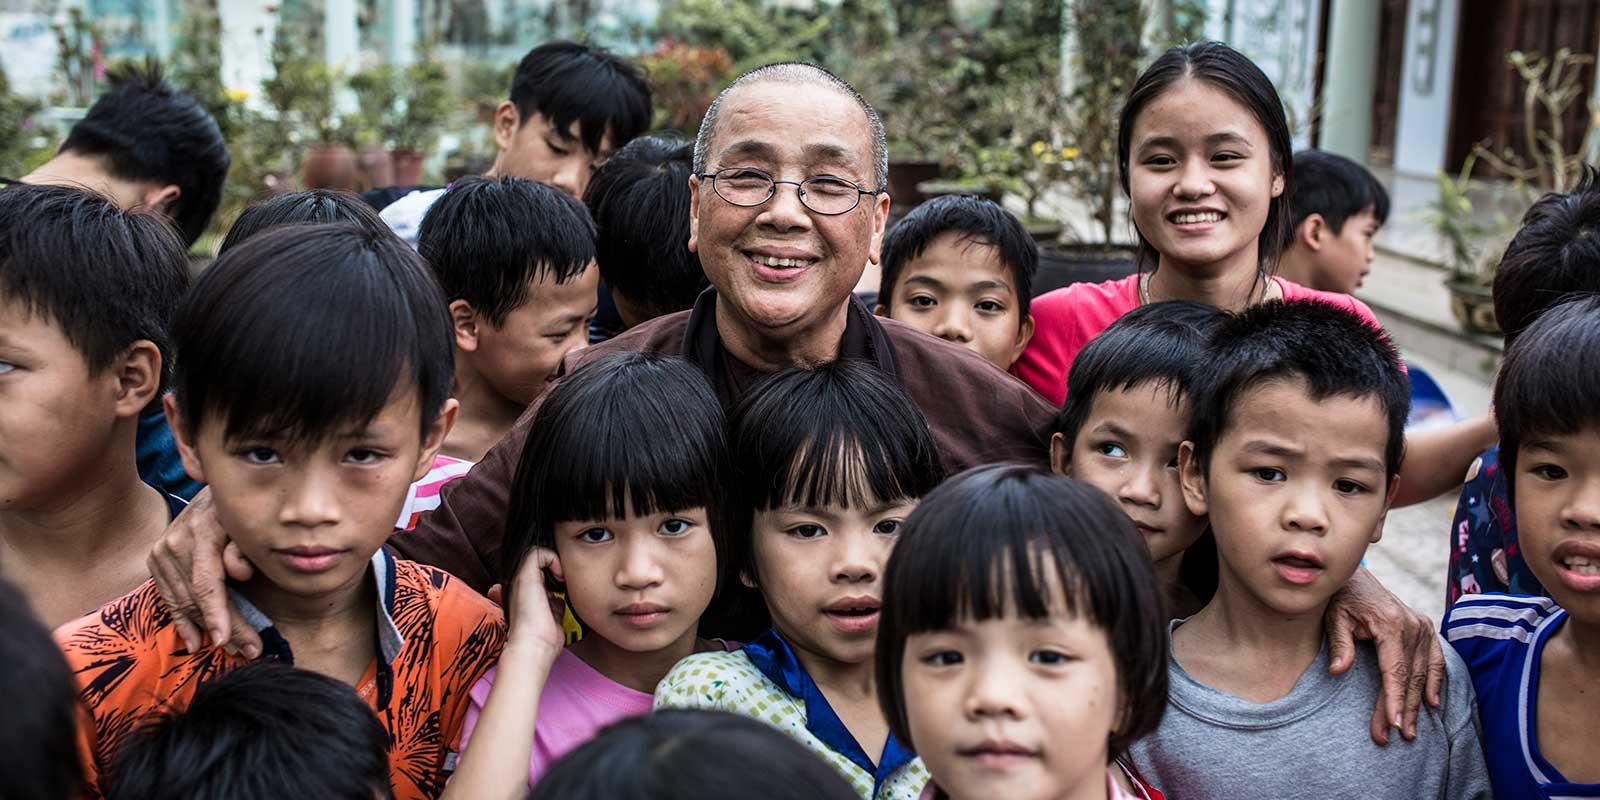 A buddhist nun in brown dress and glasses with grouop of children.